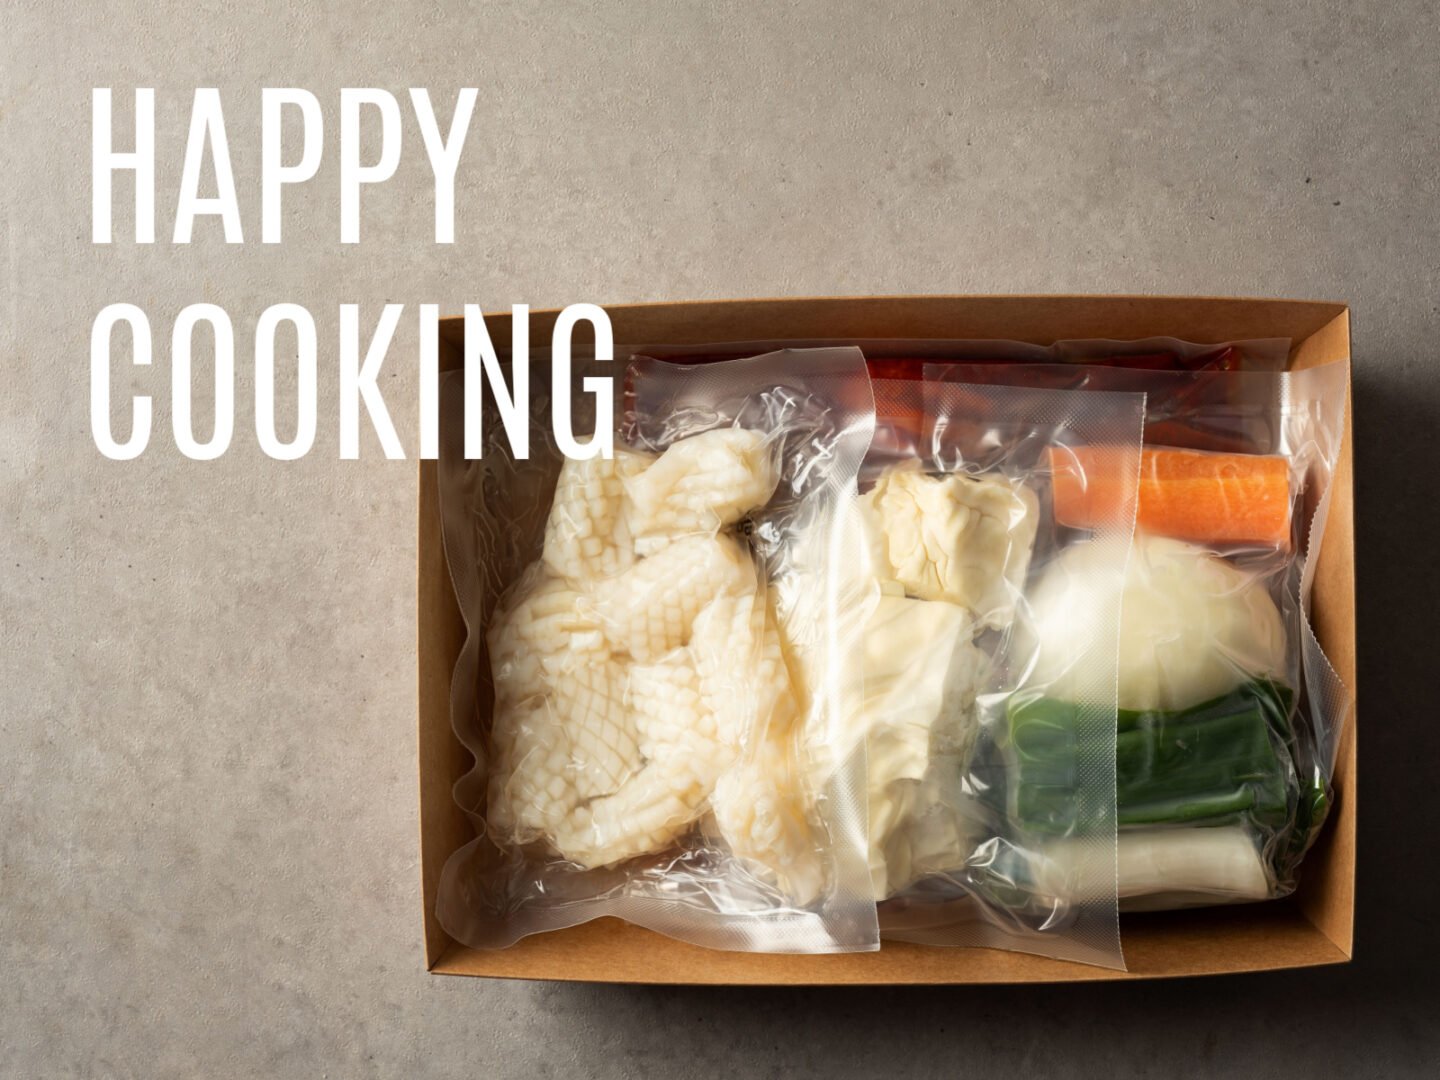 HAPPY COOKING meal kit